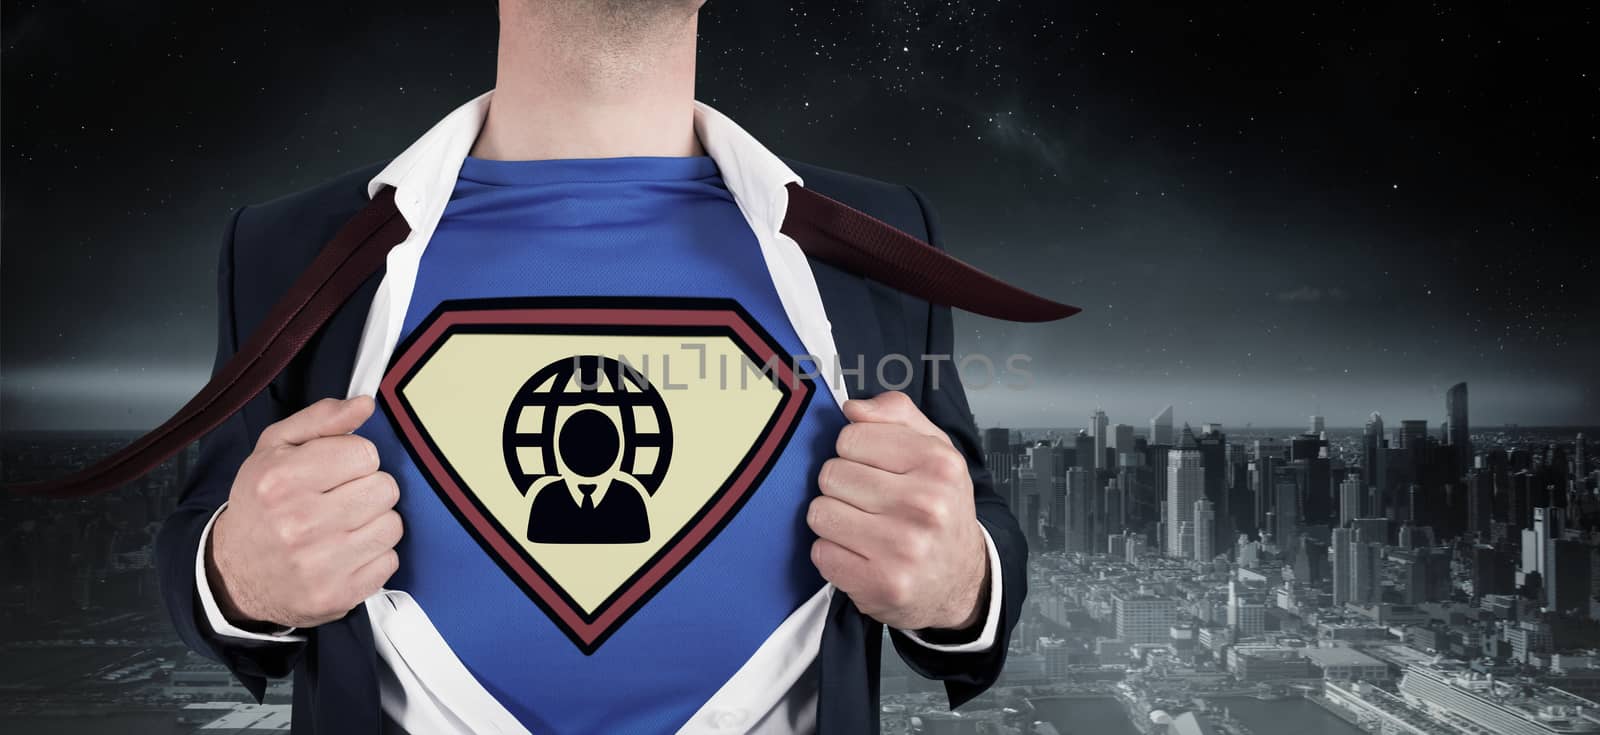 Composite image of businessman opening shirt in superhero style by Wavebreakmedia